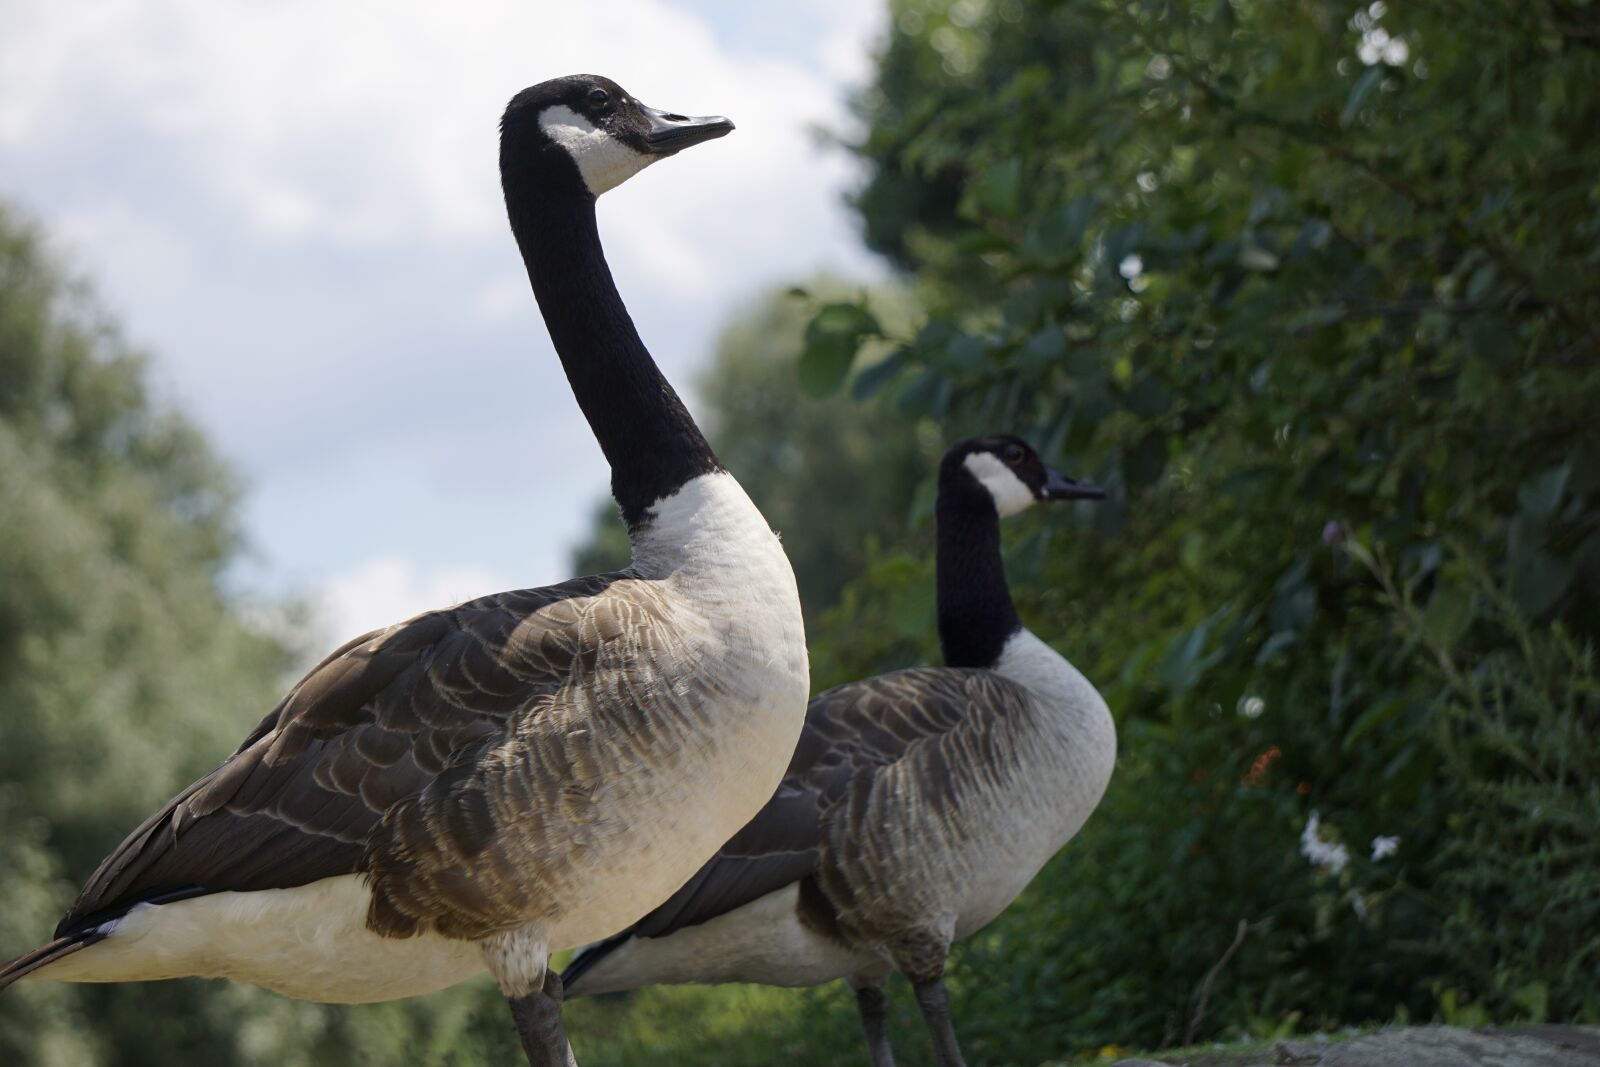 Sony a6000 sample photo. Geese, canada geese, canada photography